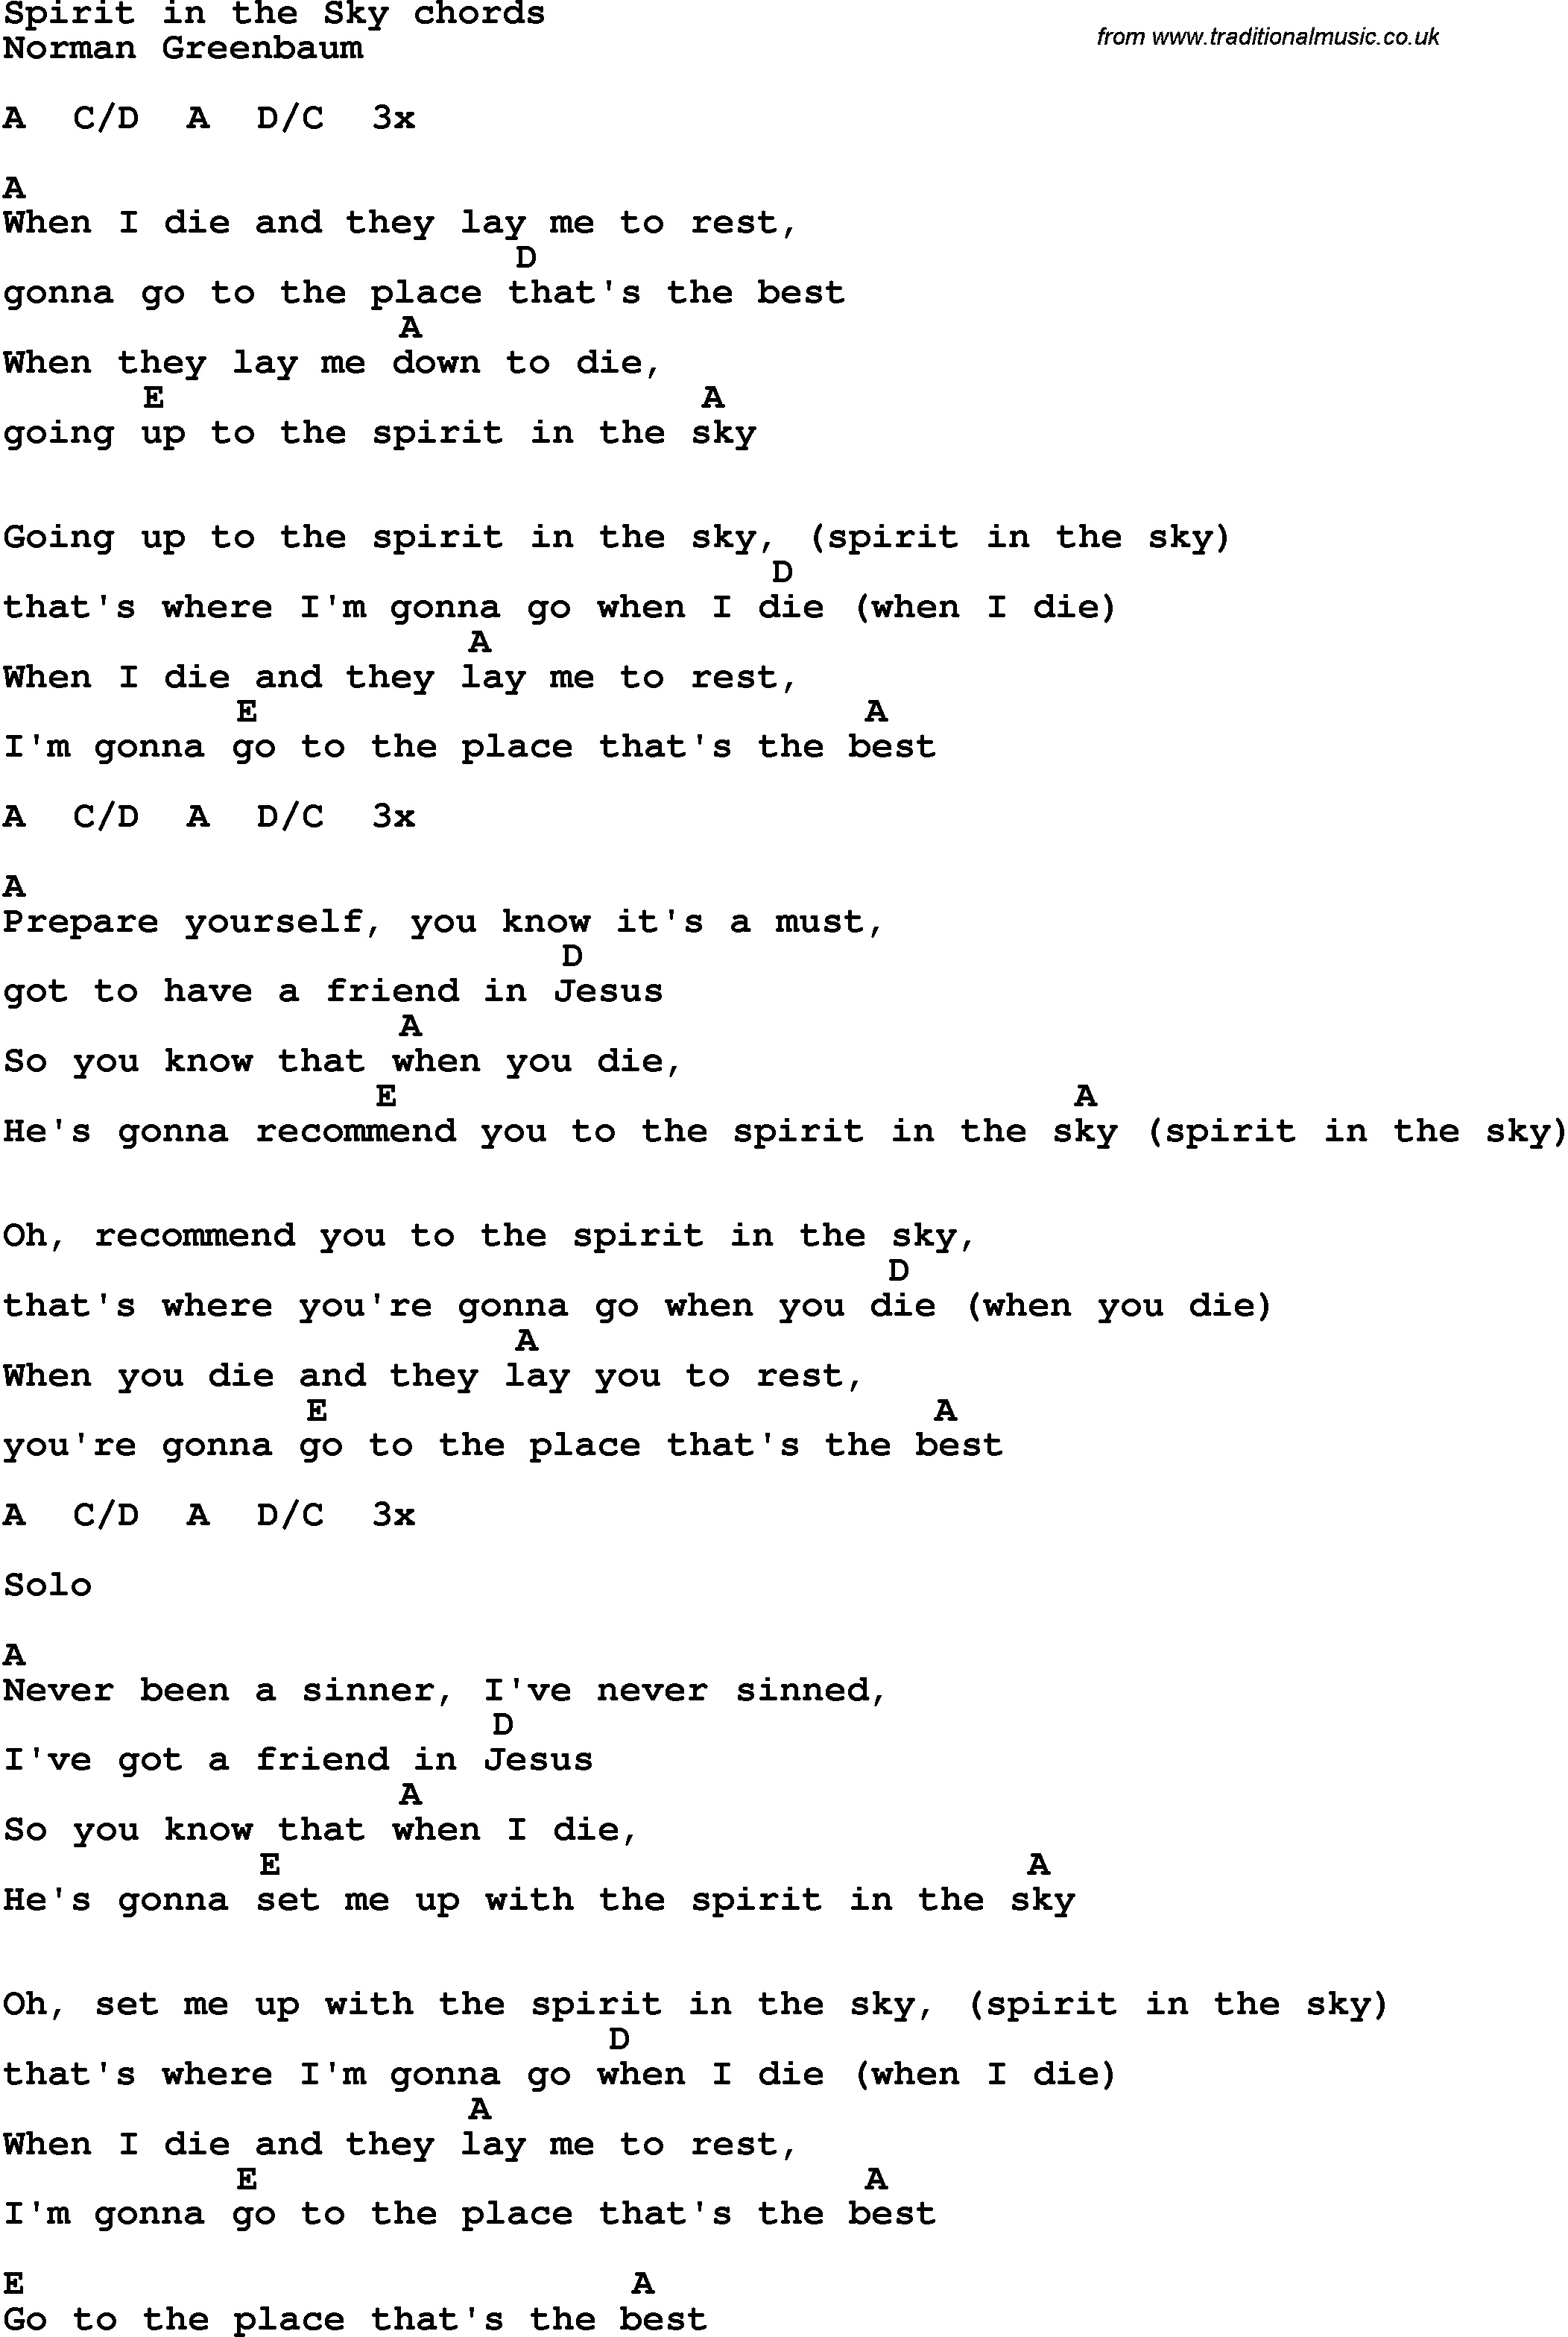 Song Lyrics with guitar chords for Spirit In The Sky